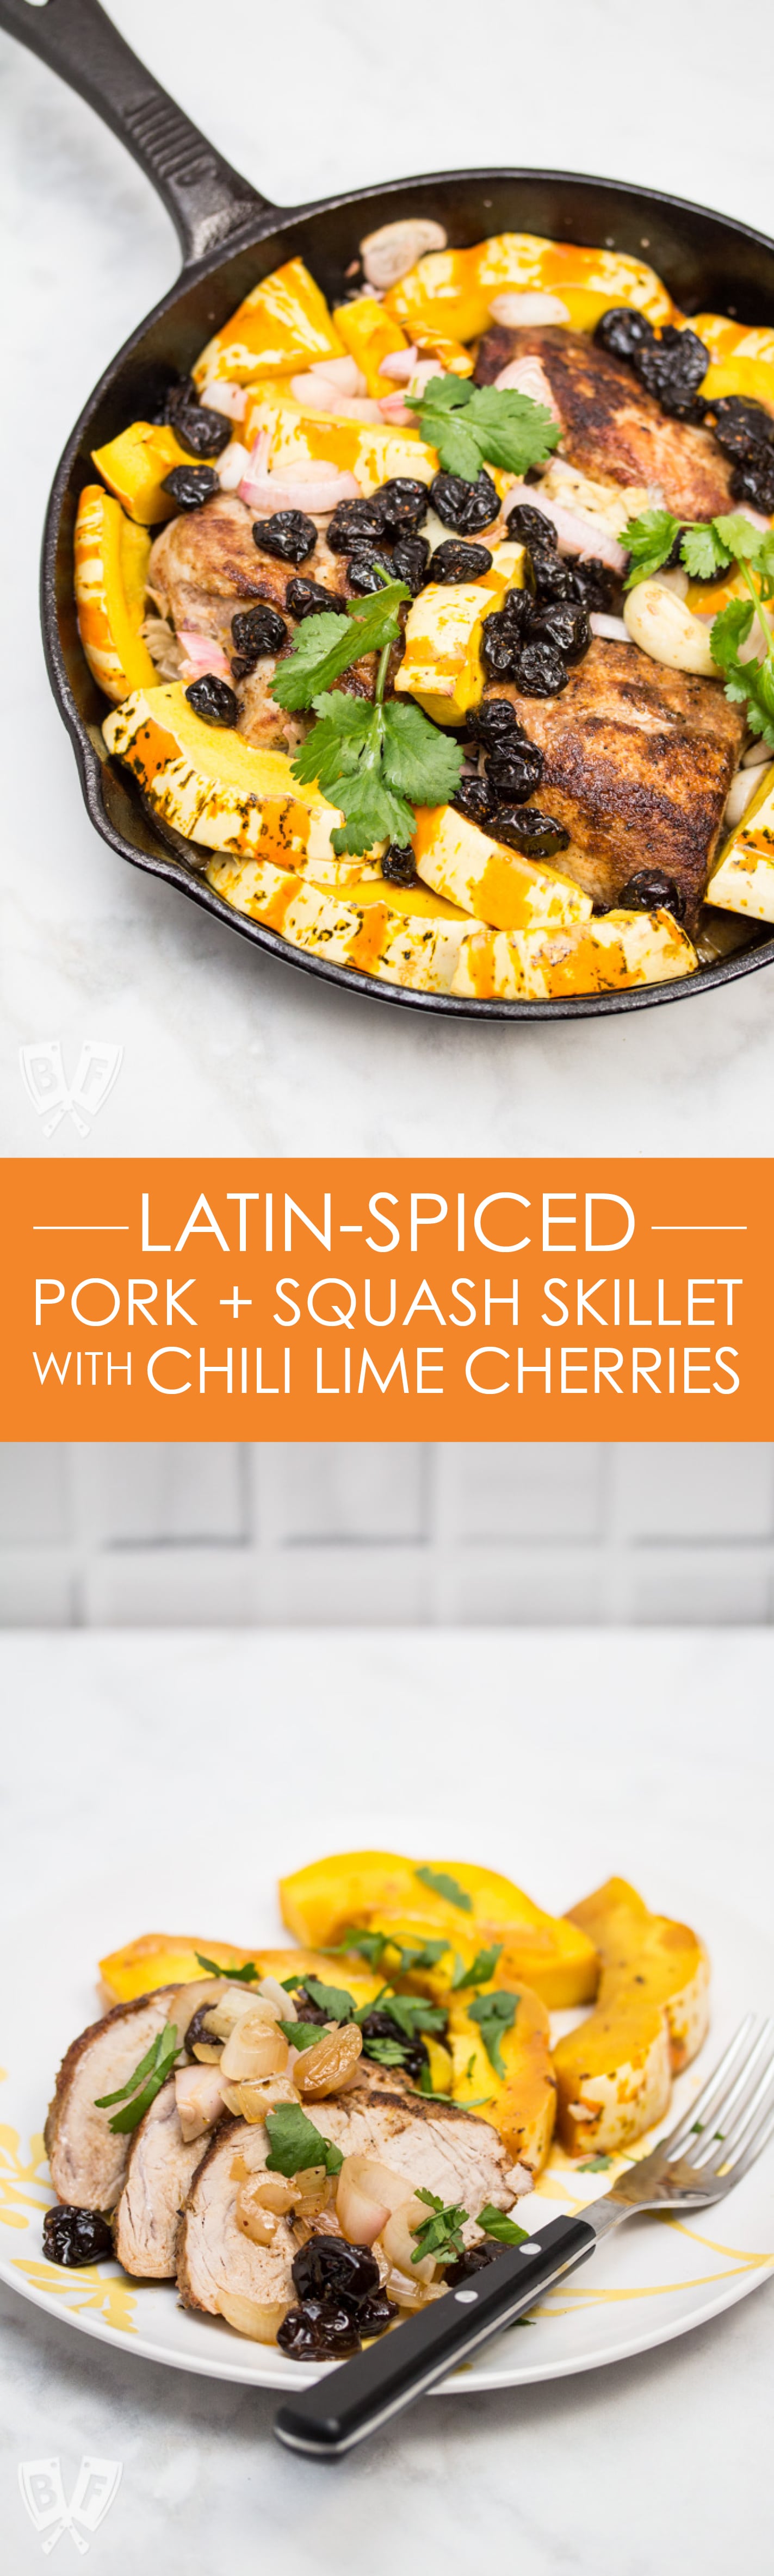 Latin-Spiced Pork + Squash Skillet with Chili Lime Cherries: (#ad) This smoky-sweet single skillet meal is a quick and easy way to get a comfort food dinner with Latin flair on the table any night of the week.